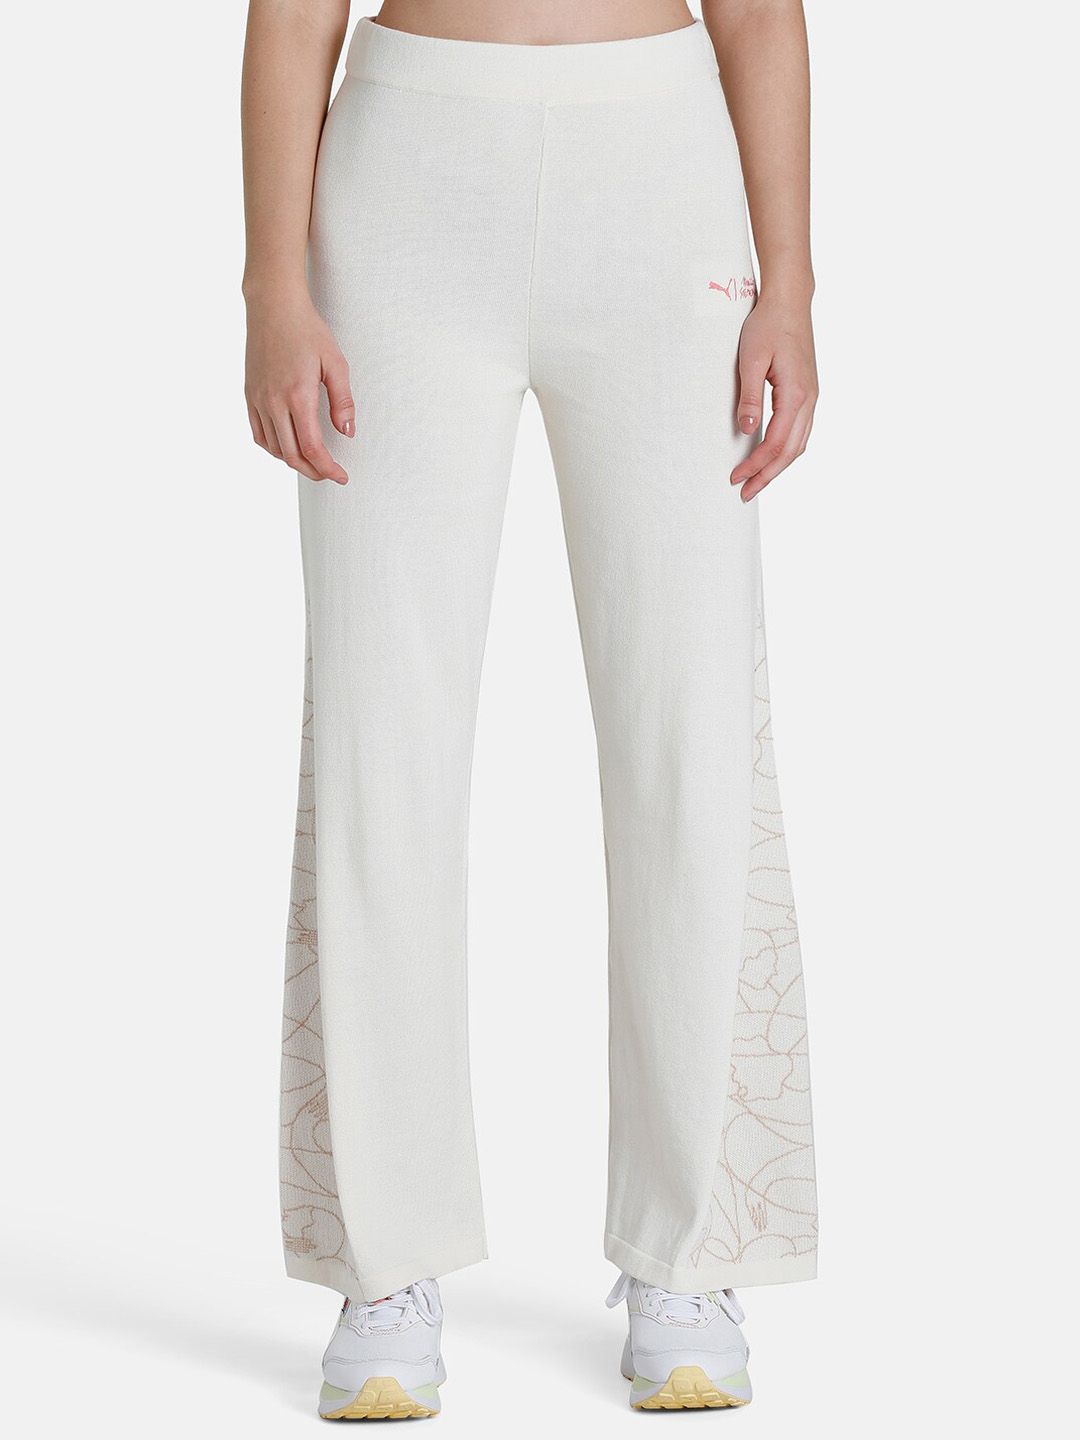 Puma Women White Solid  Stephenson Knit Cotton Track Pant Price in India